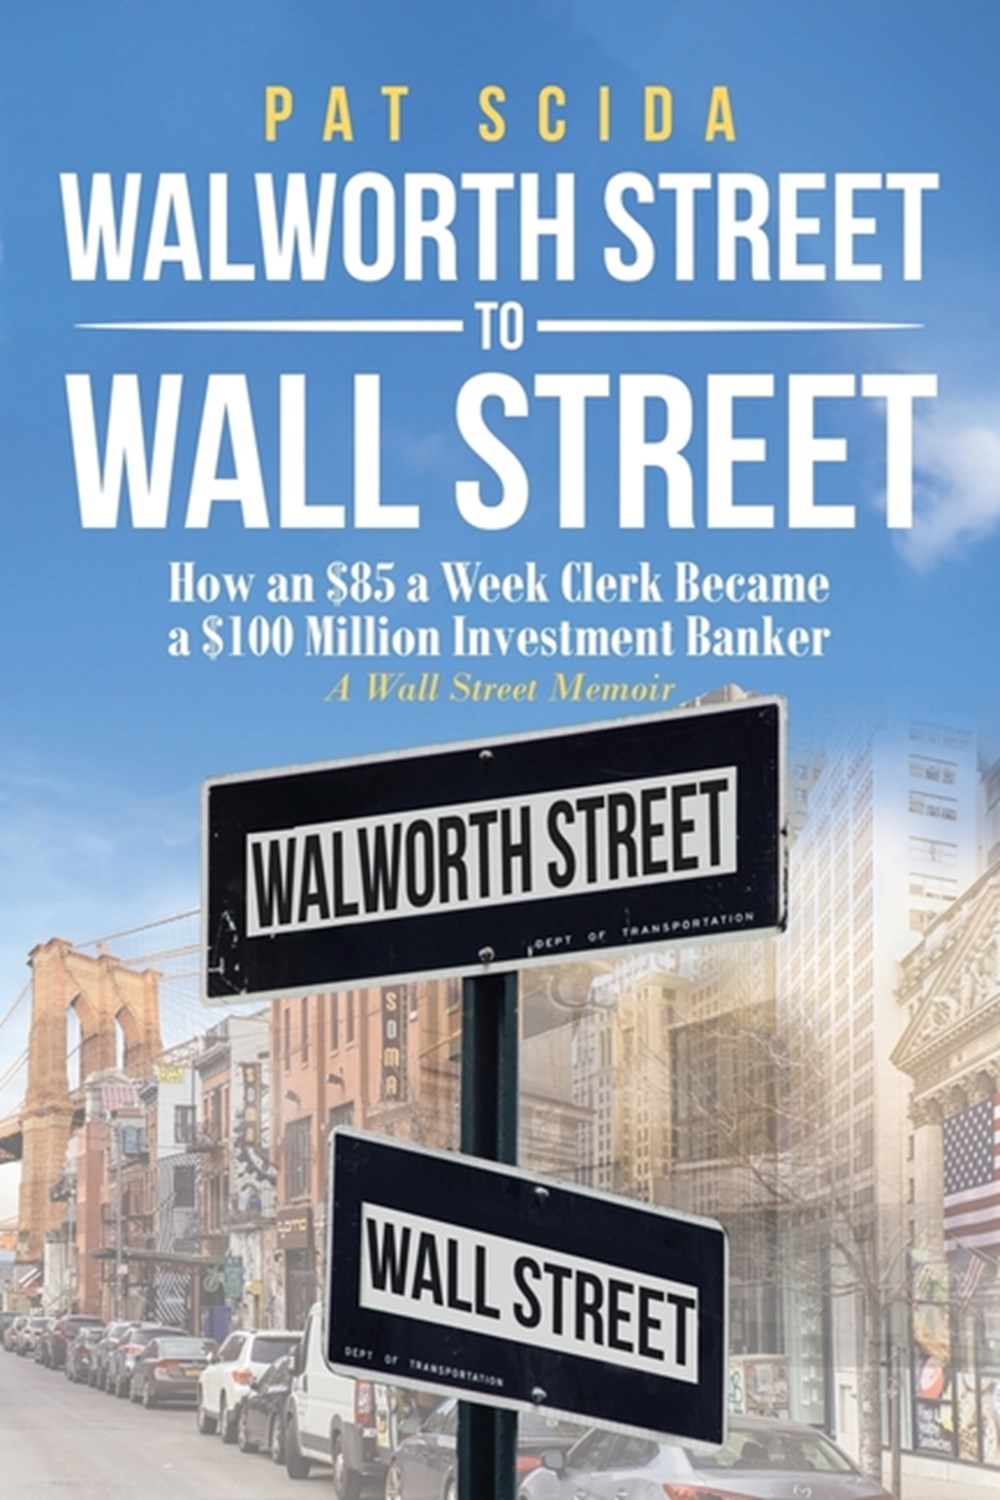 Walworth Street to Wall Street How an $85 a Week Clerk Became a $100 Million Investment Banker: A Wa